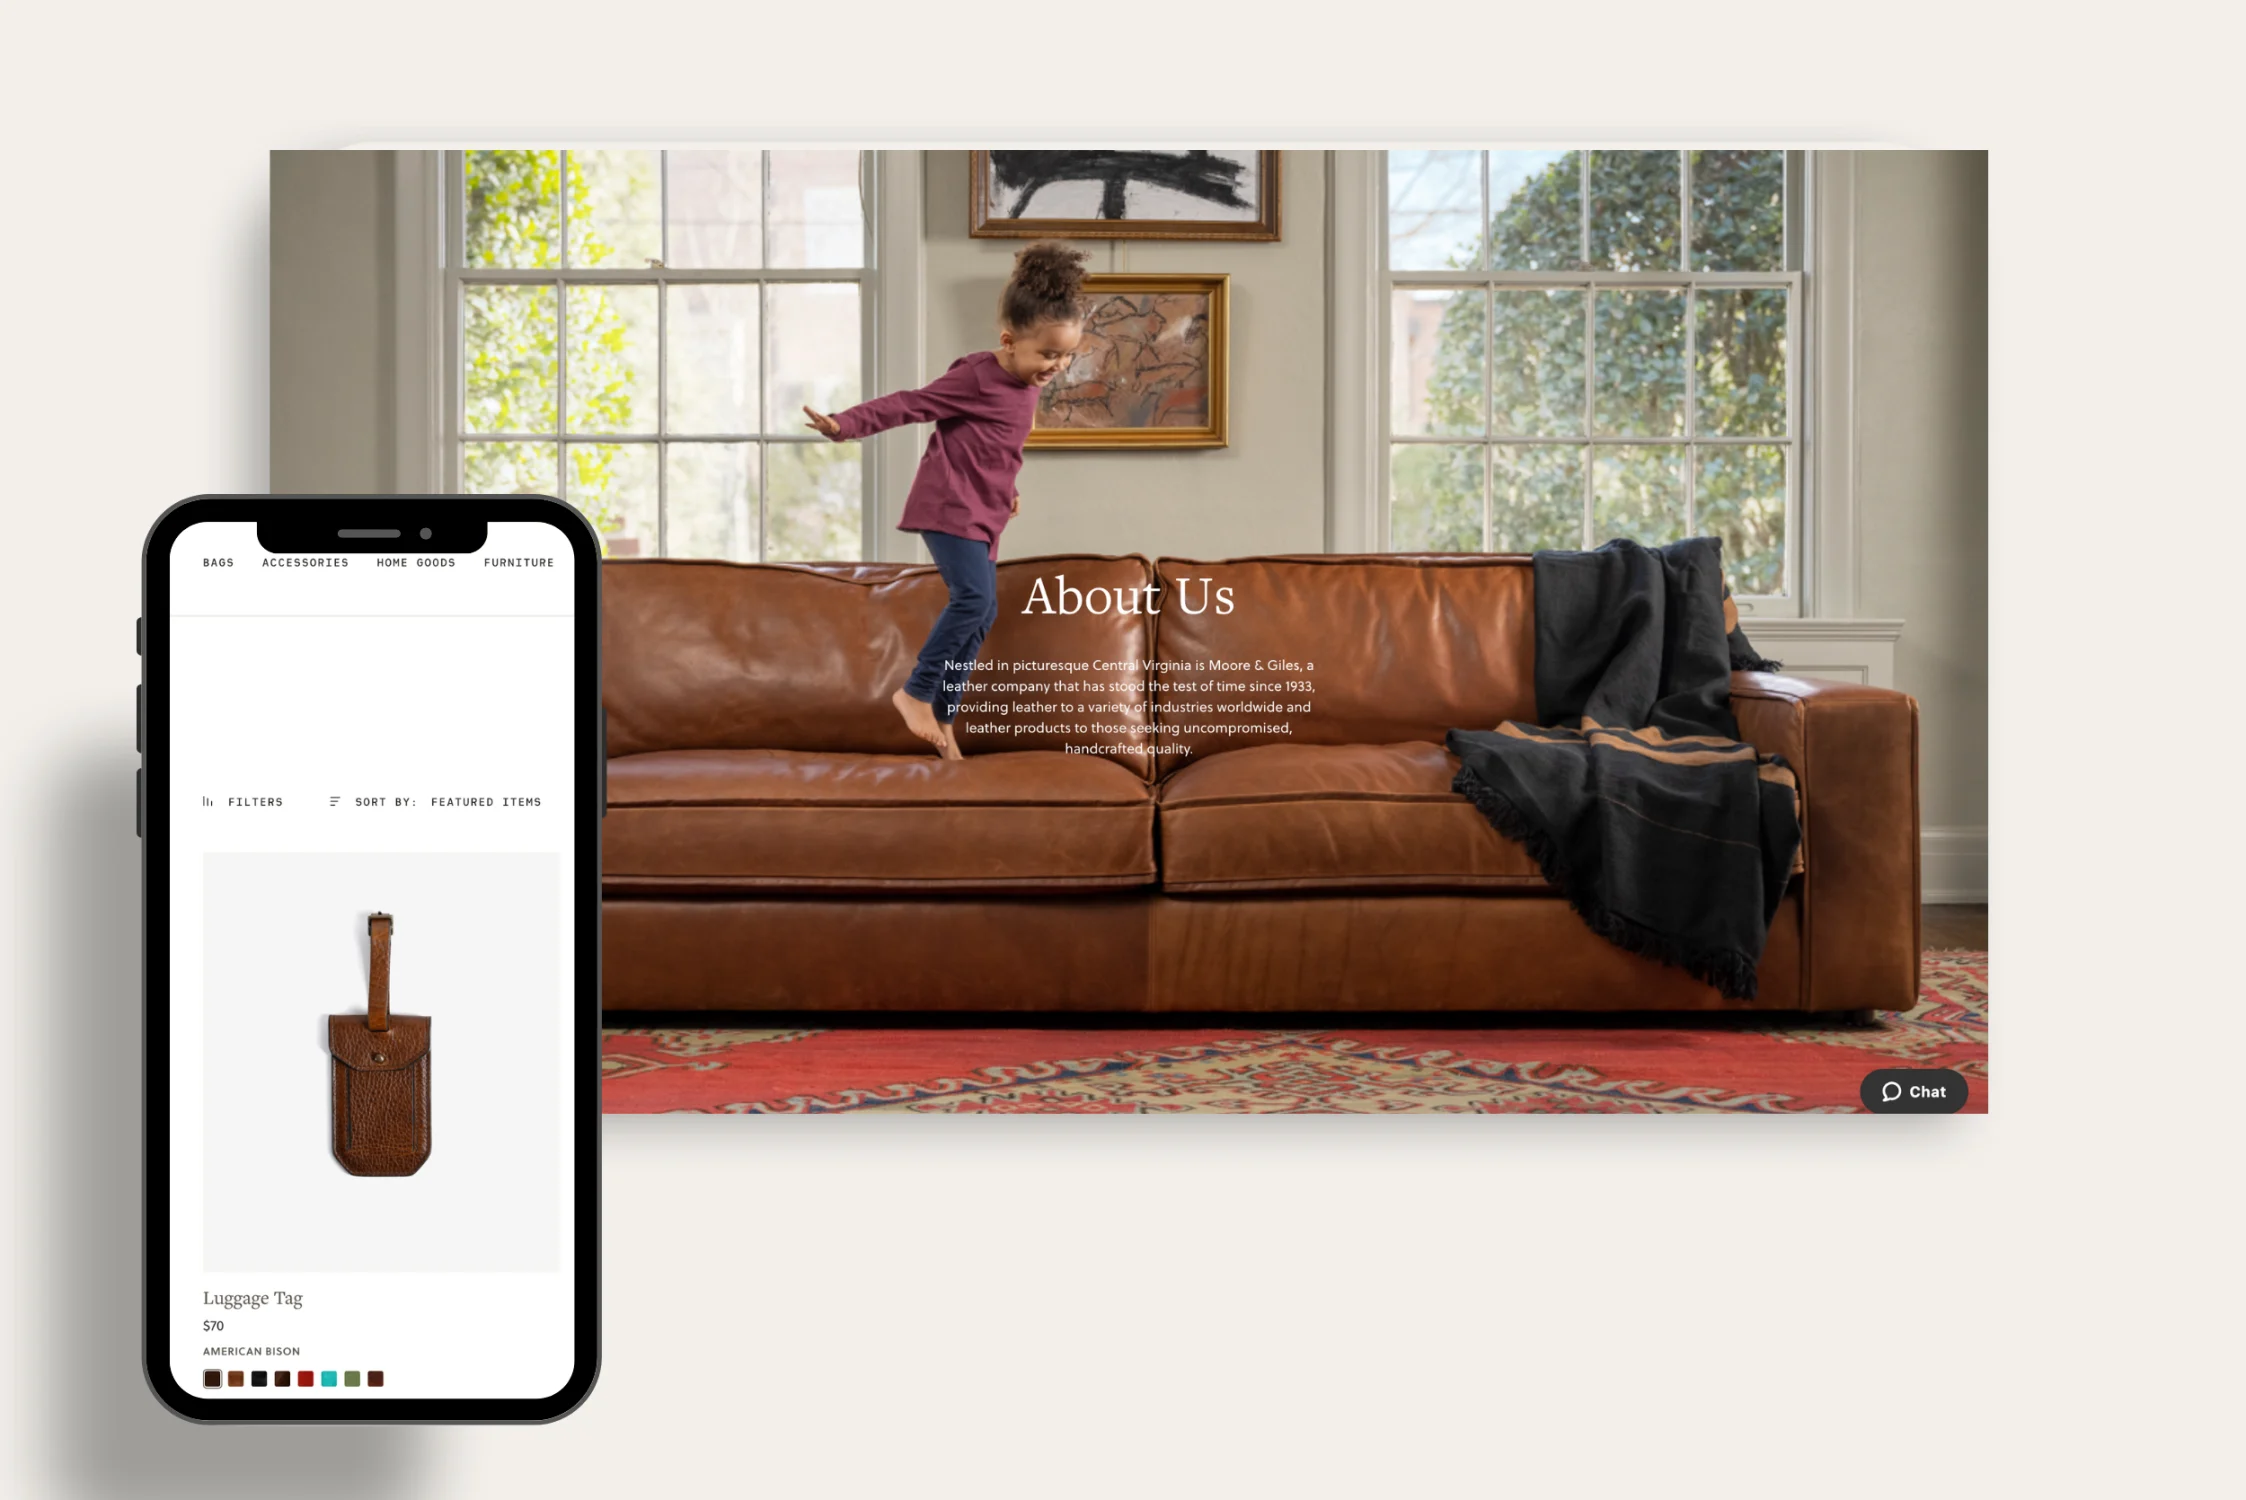 A mobile device shows a web page from Moore & Giles with a featured section titled 'About Us'. Beside the phone is the webpage displayed on a desktop, showing a child playfully stepping on a brown leather couch, echoing the brand's message of leather that integrates into everyday life.